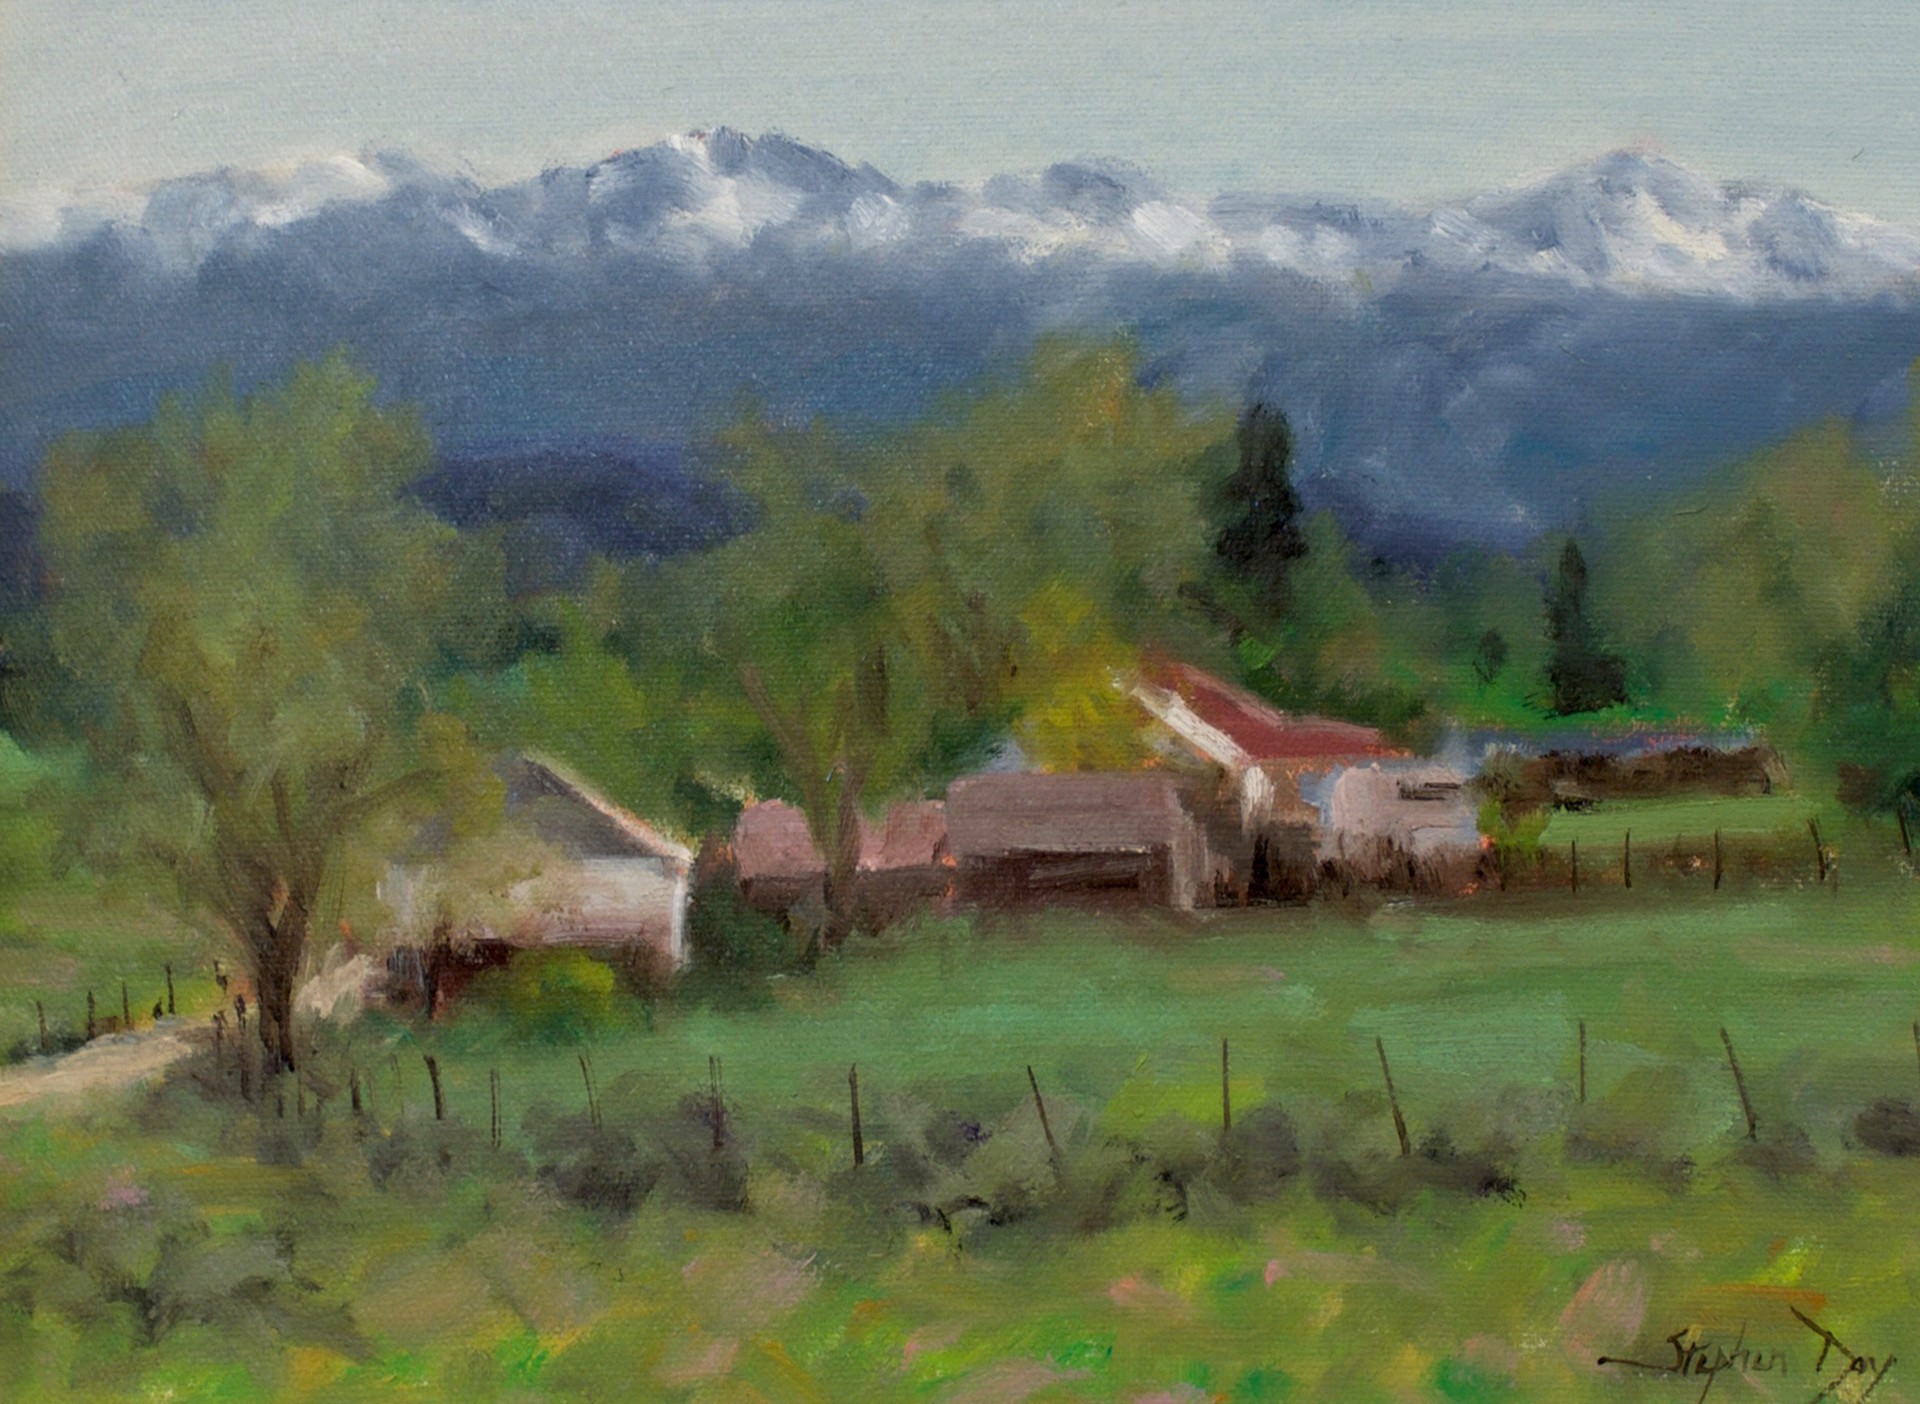 Valley Ranch by Stephen Day